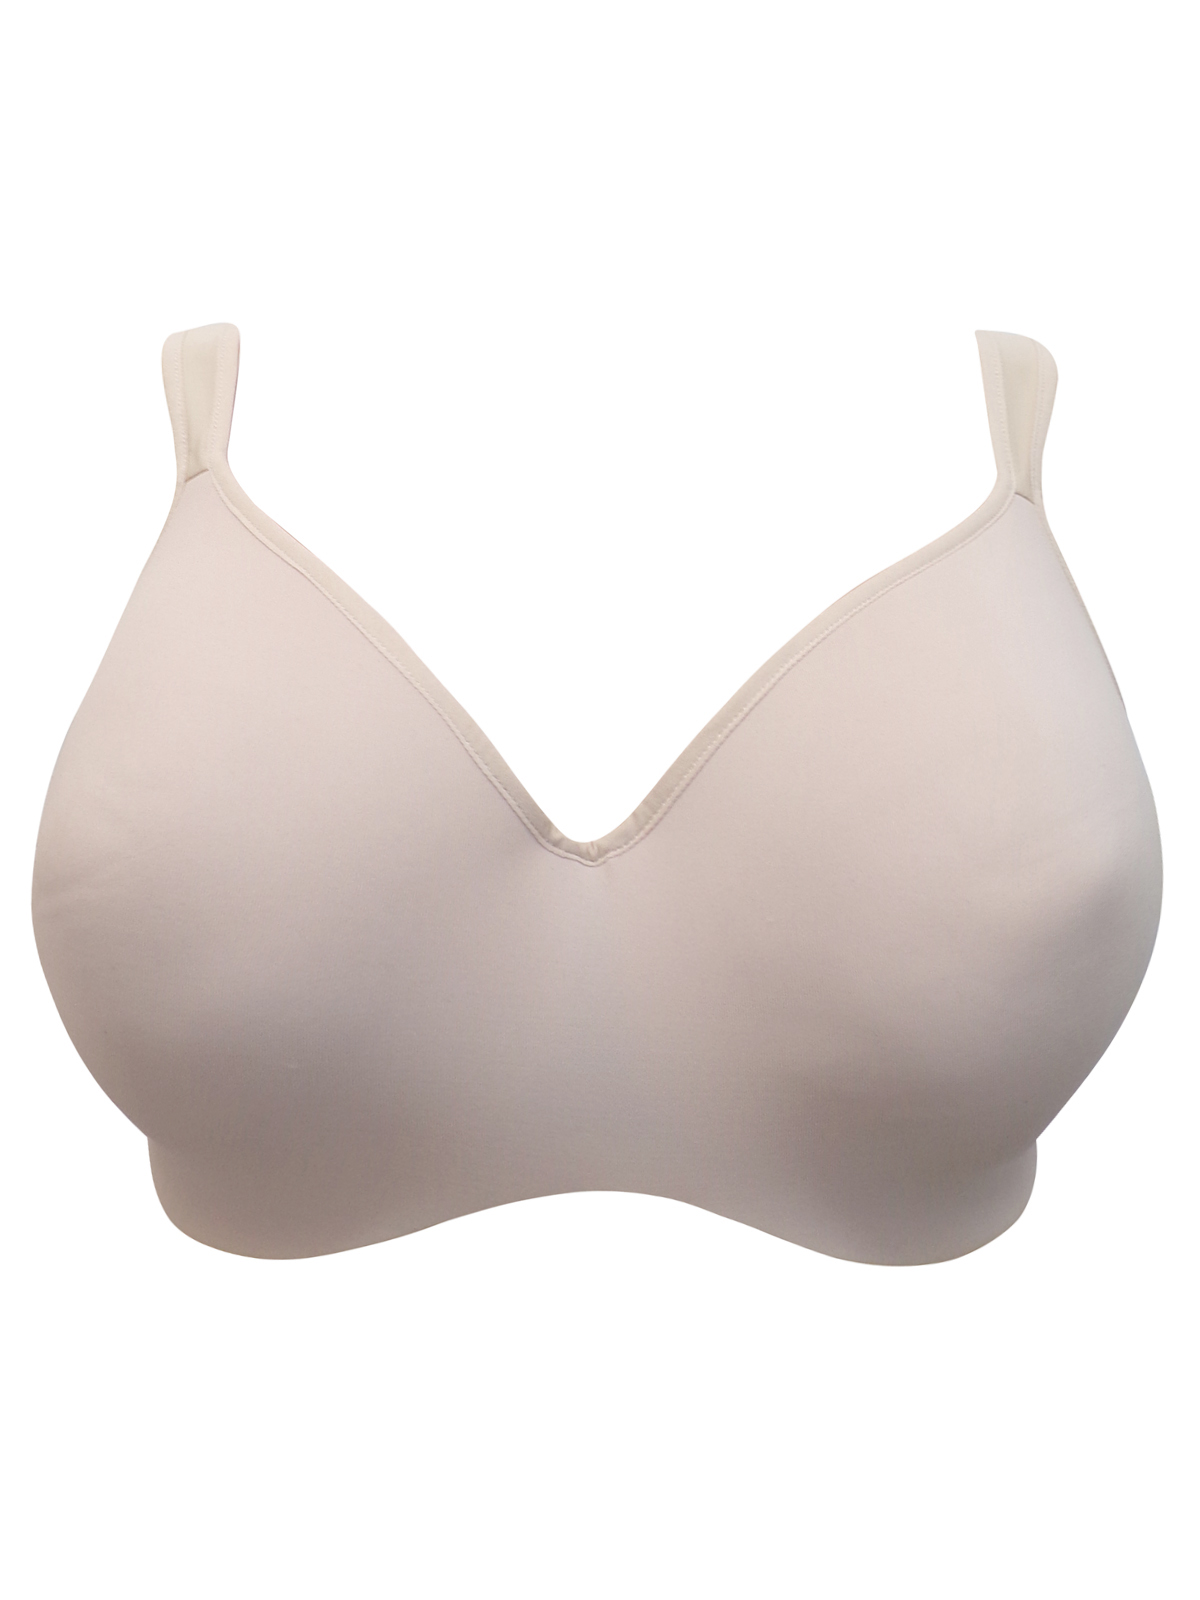 Penningtons - - Penningtons Ti Voglio NATURAL Moulded Full Cup Bra - Size  40 to 44 (DDD)